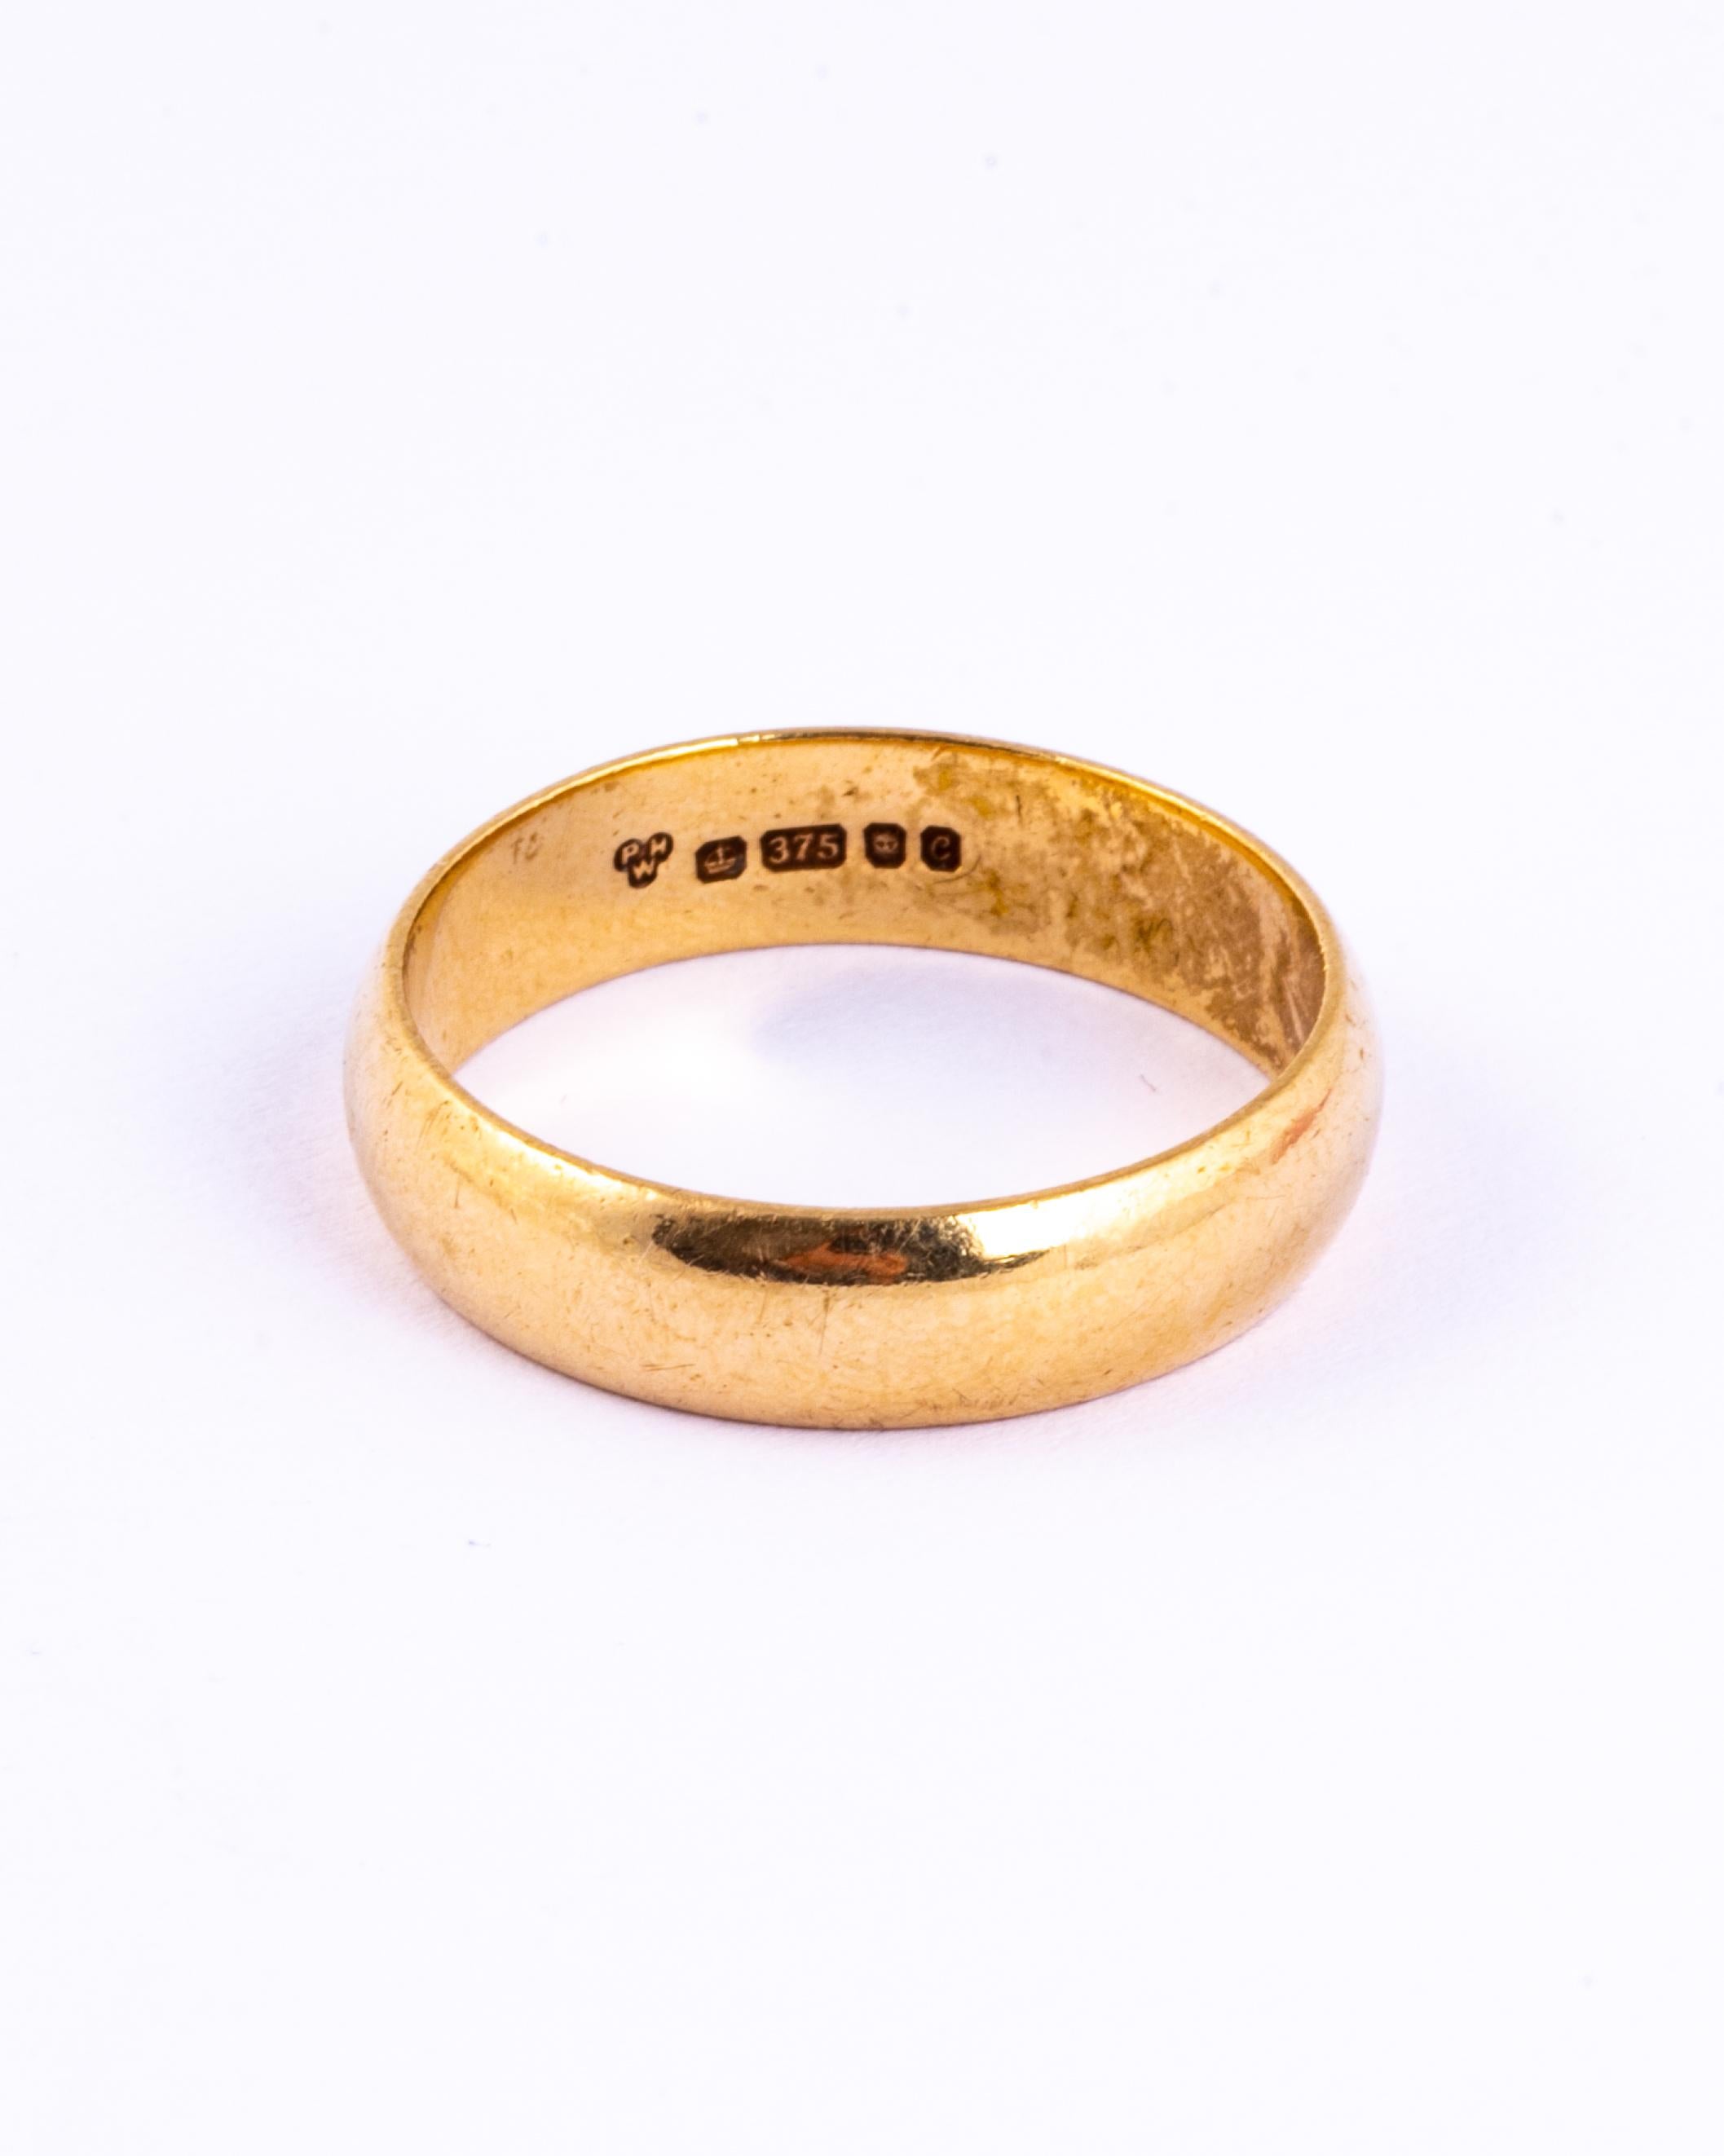 Glossy 9ct gold band perfect for a wedding band or just a simple everyday piece. Made in London, England.

Ring Size:W 1/2 or 11 1/4
Band Width: 6mm

Weight: 5.5g